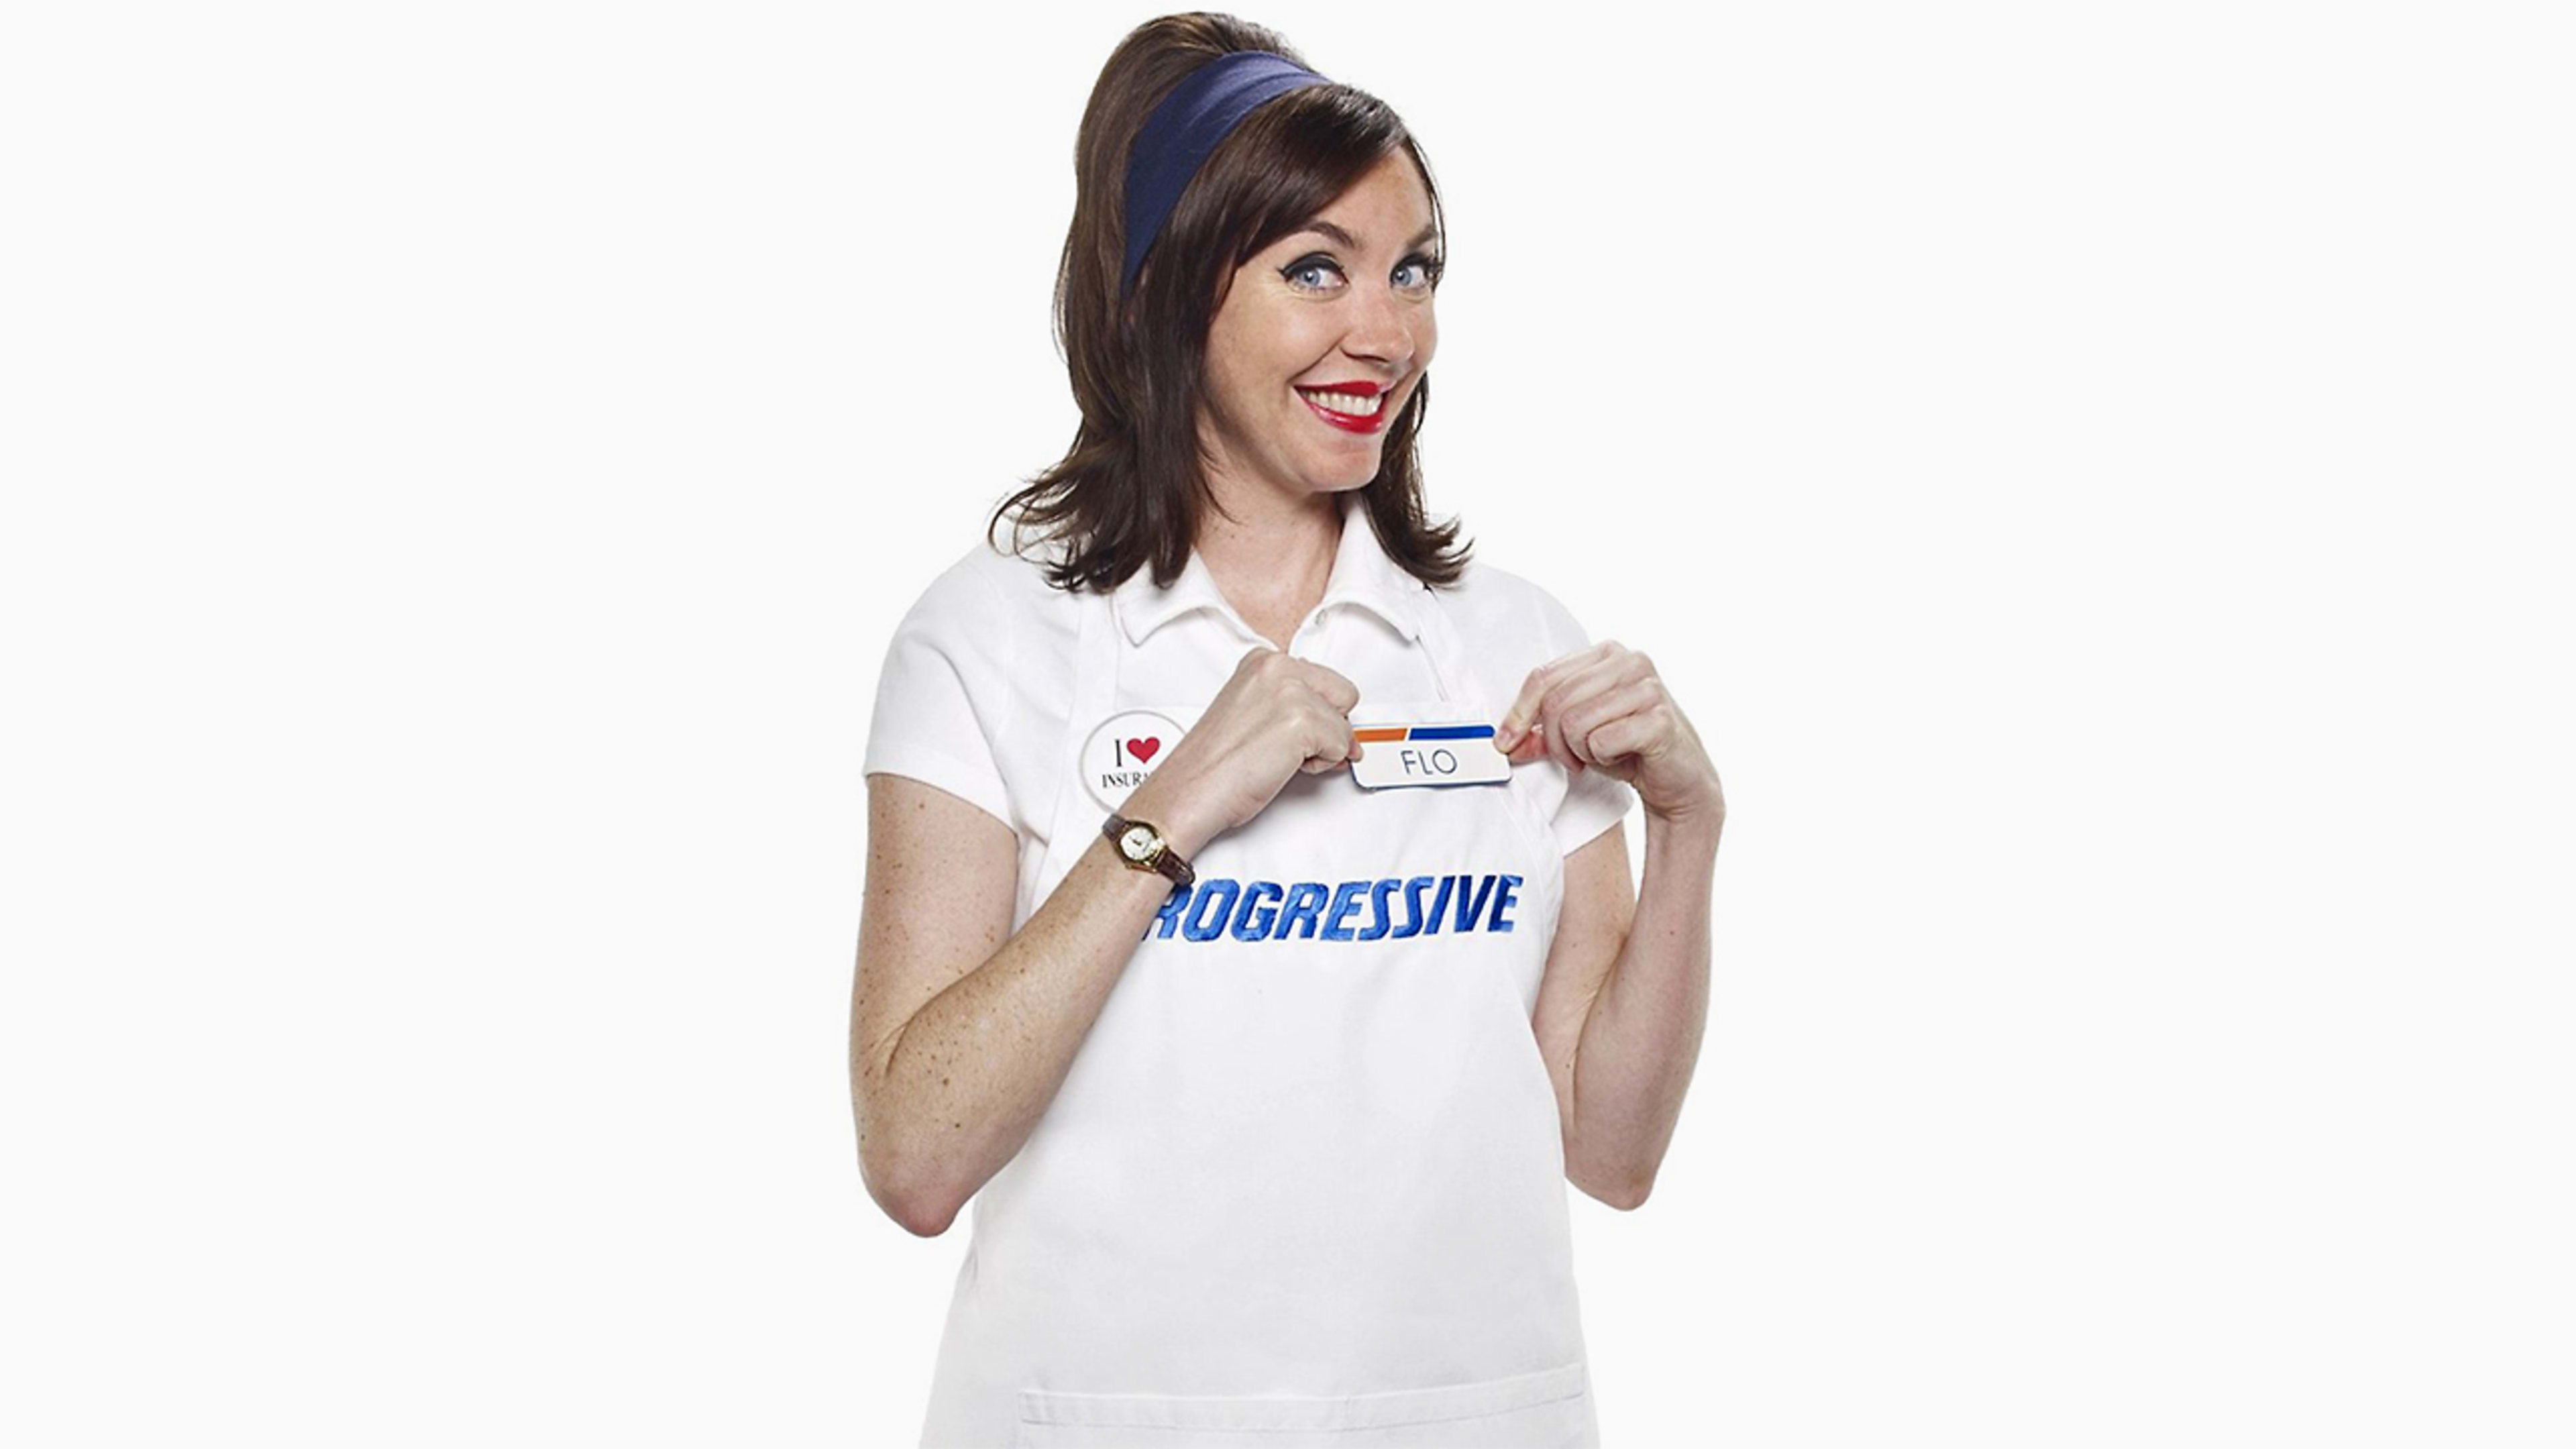 10 Years of Flo: The story behind Progressive’s accidental ad icon